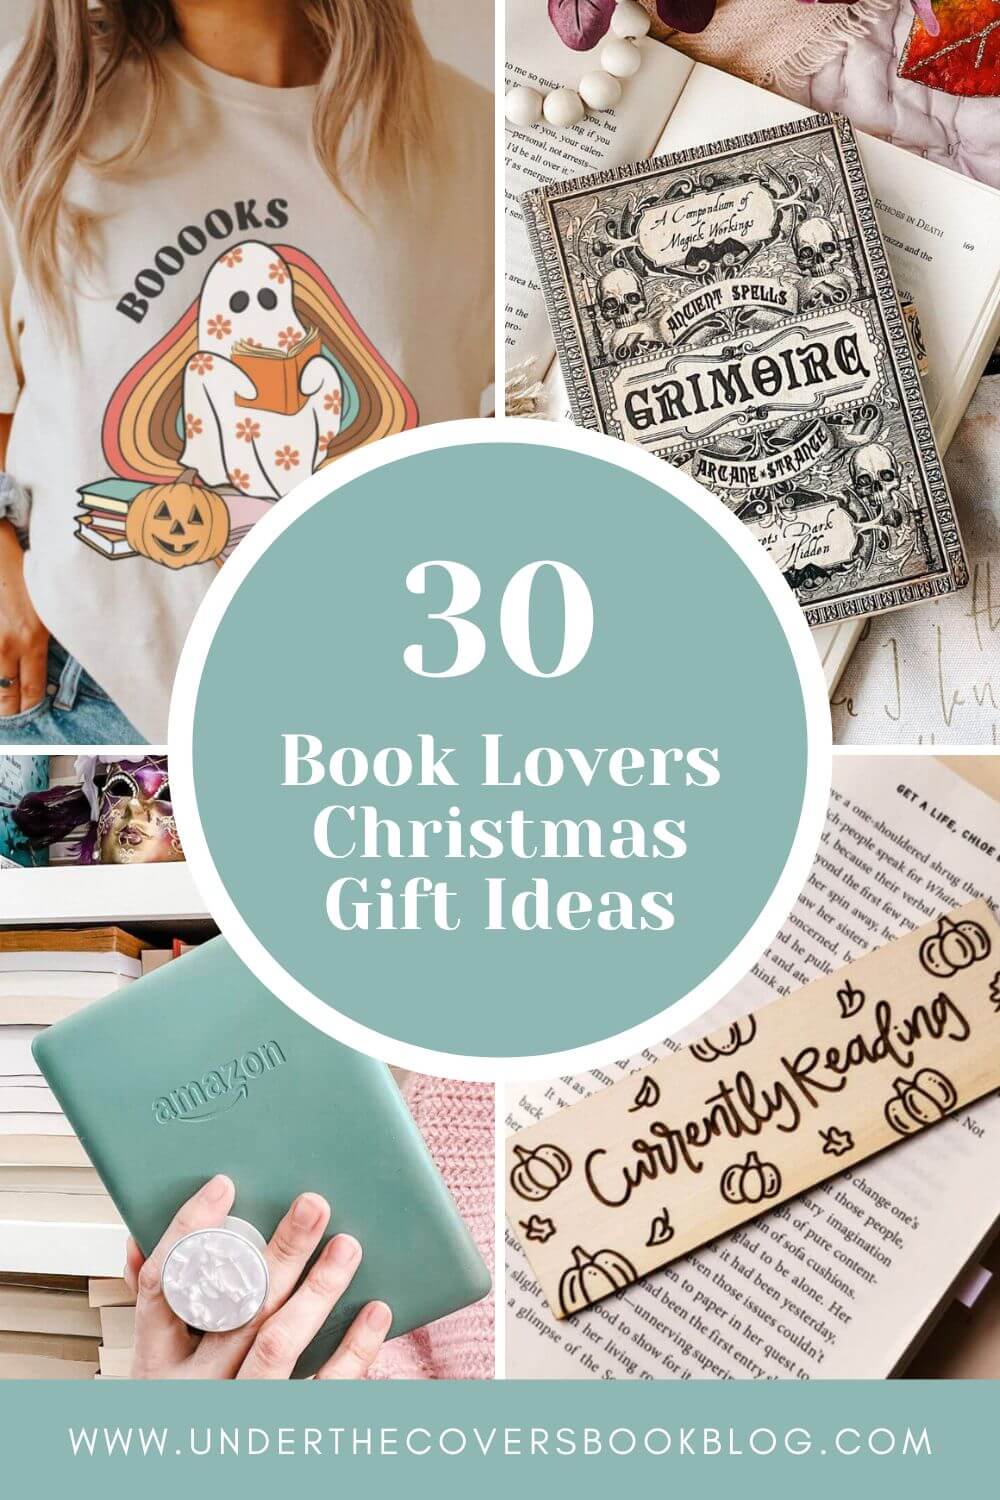 Gift Ideas for Book Lovers: A Bookworm Christmas Guide